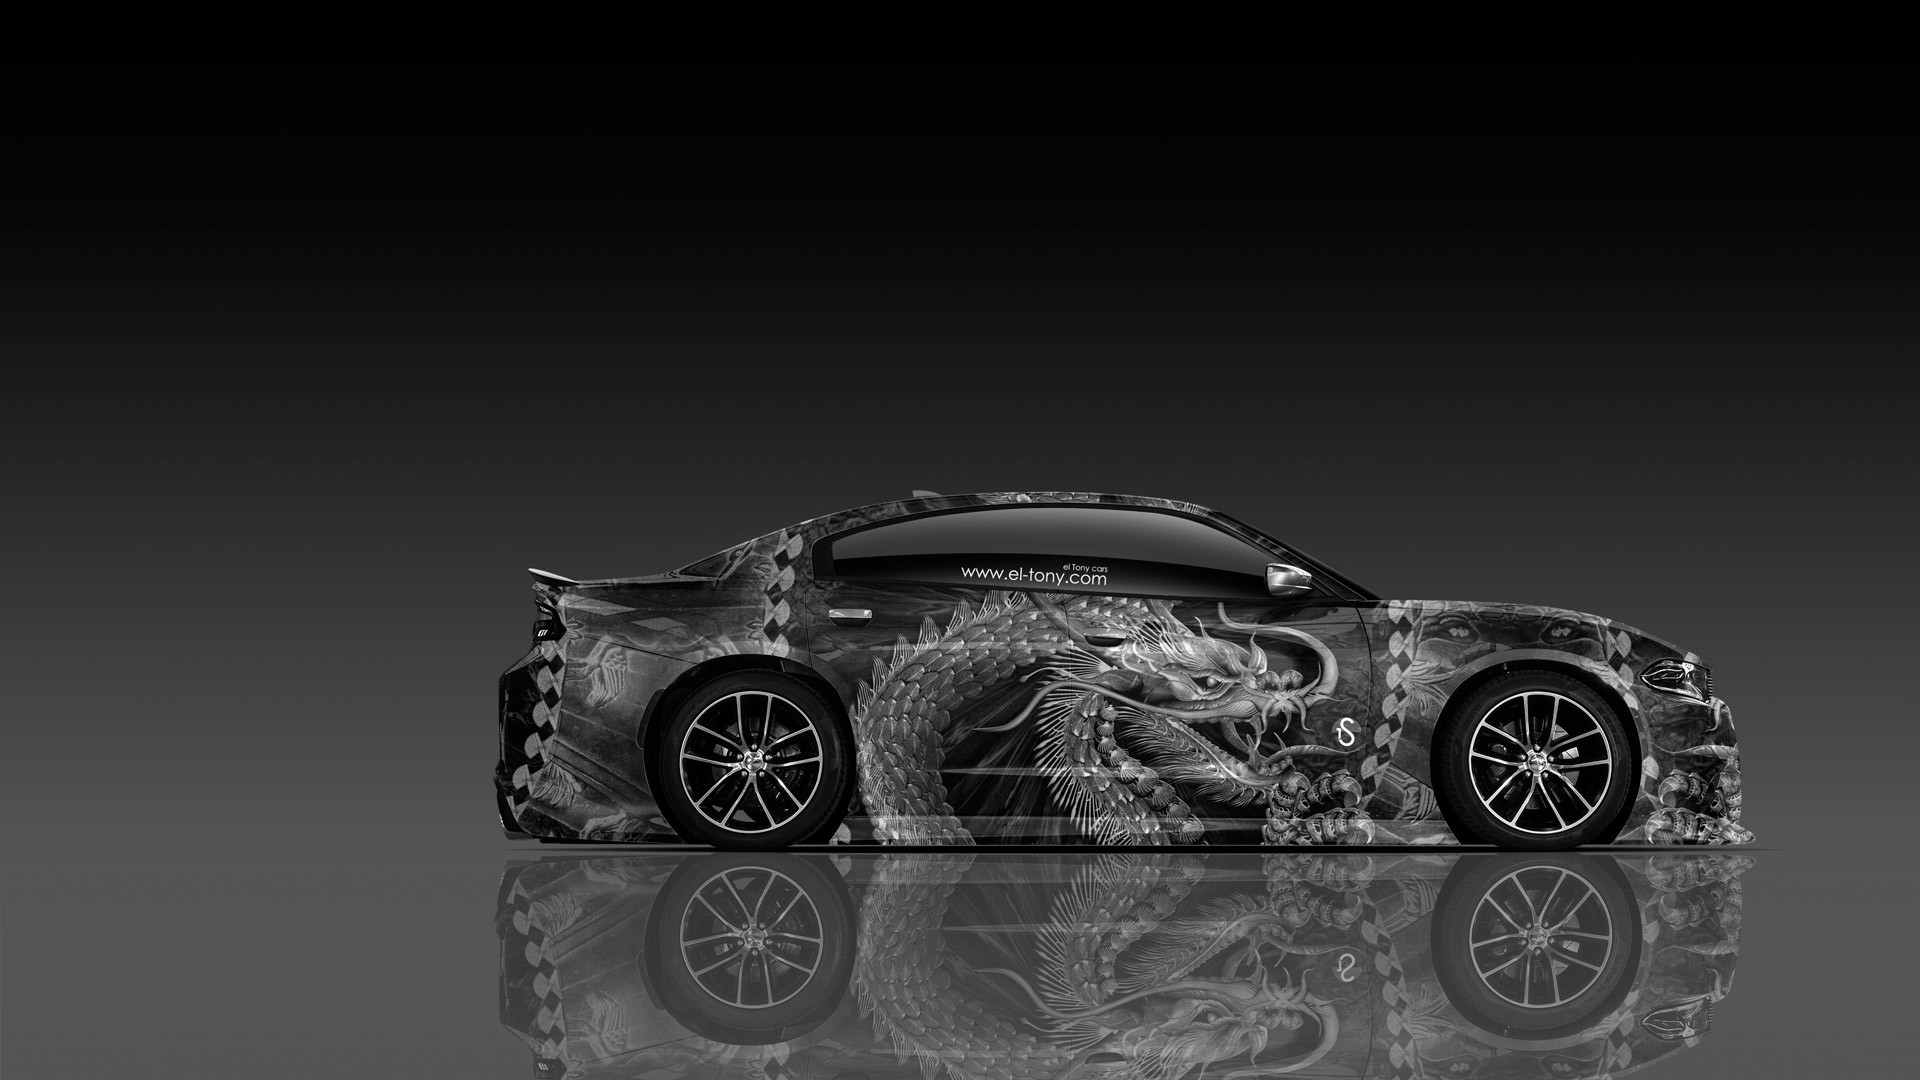 1920x1080 ... Dodge-Charger-RT-Muscle-Side-Dragon-Aerography-Car-